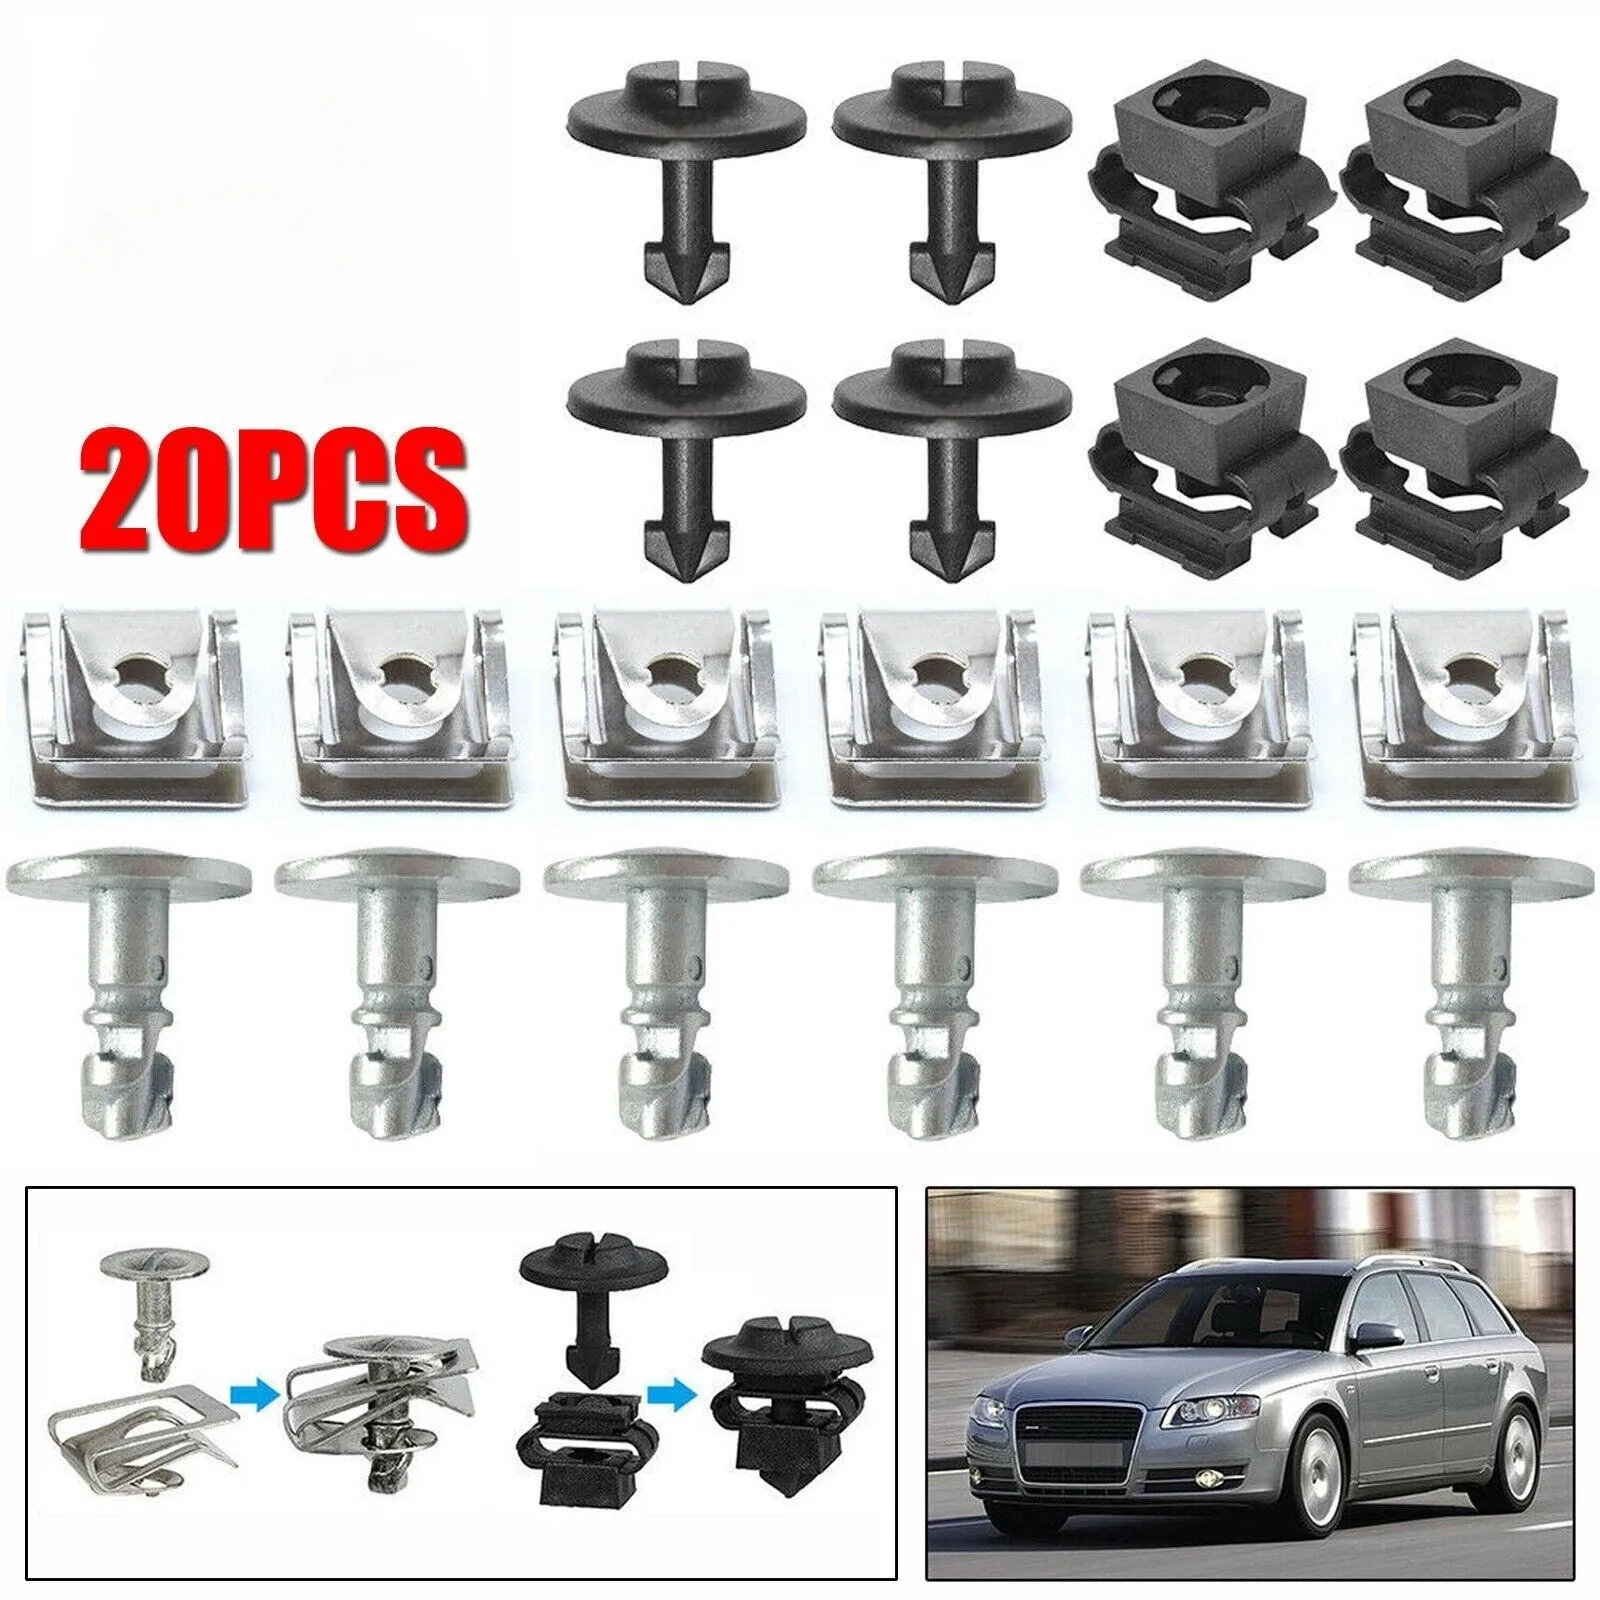 

Car Undertray Guard Engine Under Cover Hood Snap Fixing Clips & Screws 8D0805960 8D0805121 For AUDI A4 A6 For VW Passat B5